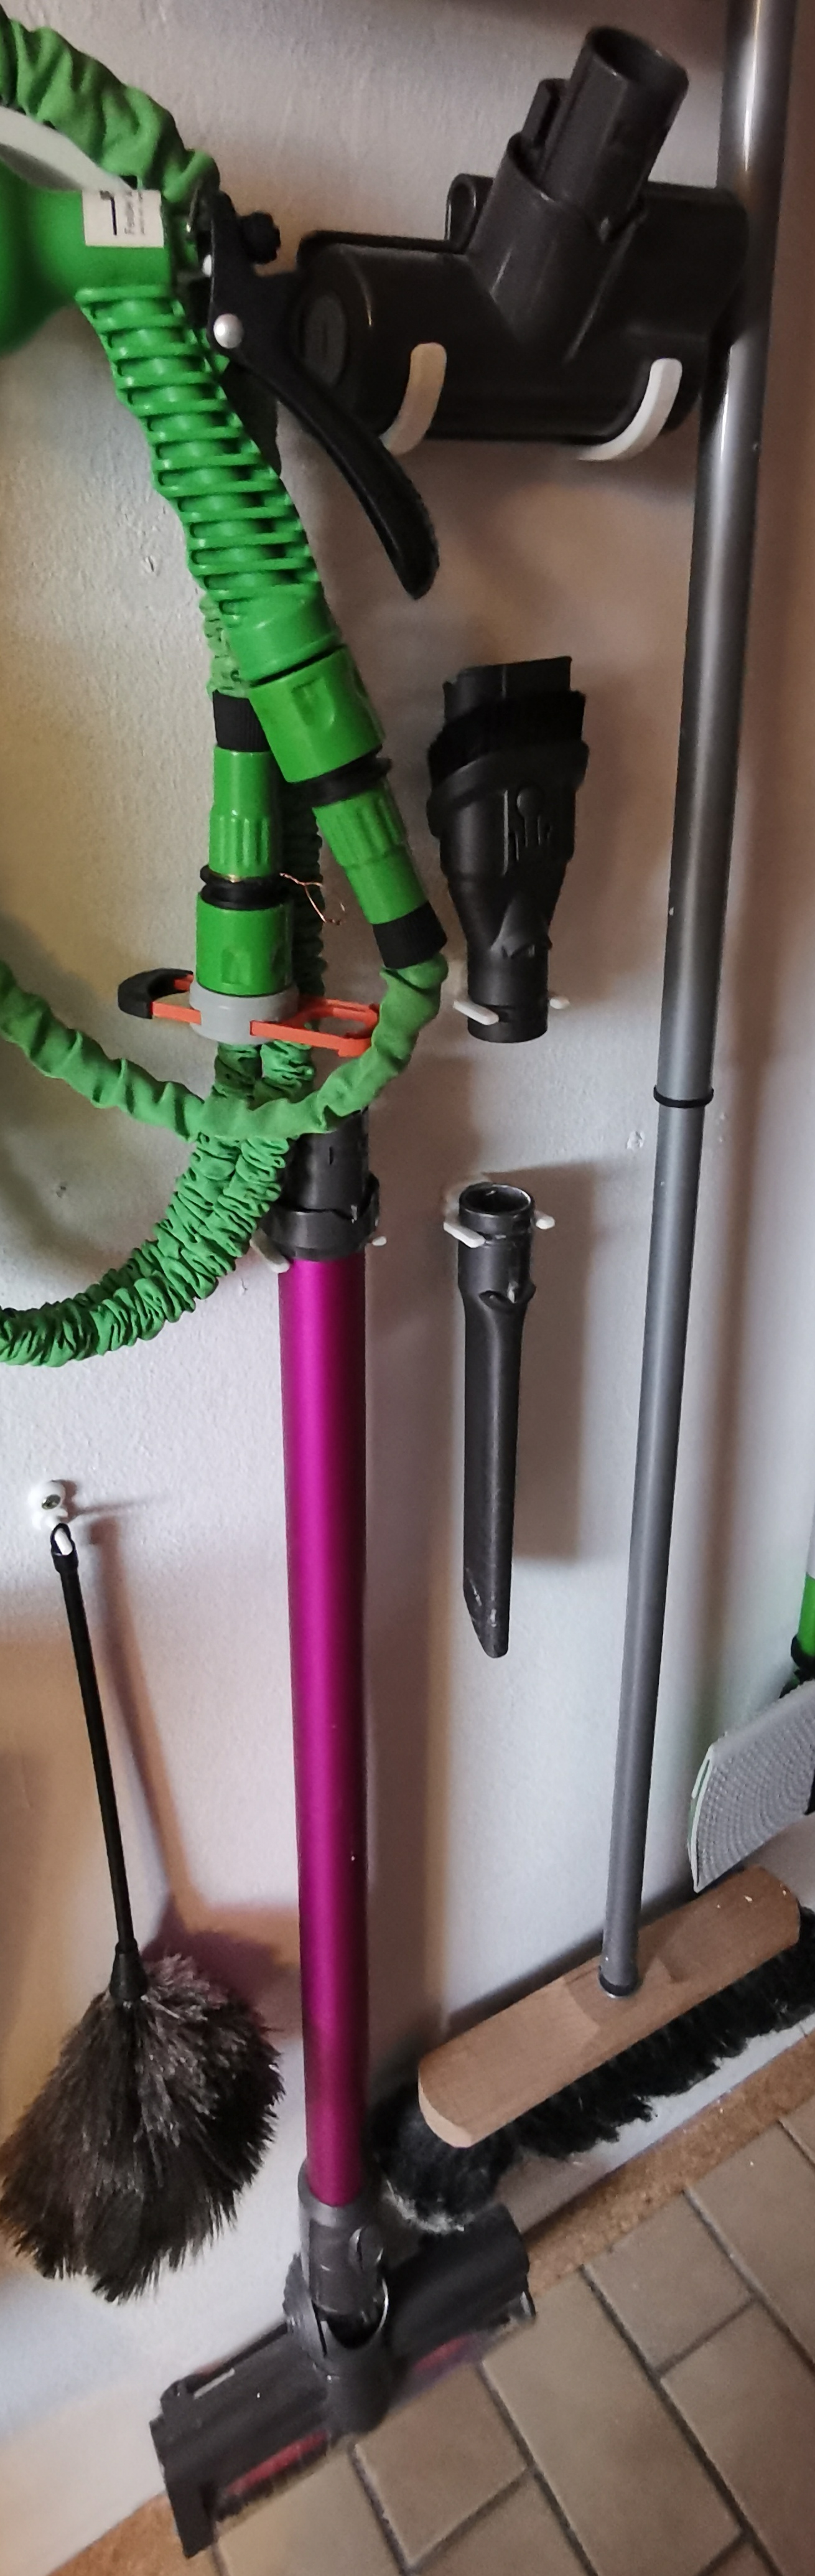 Dyson Wallmounts for tools - small, nice looking and easy printable